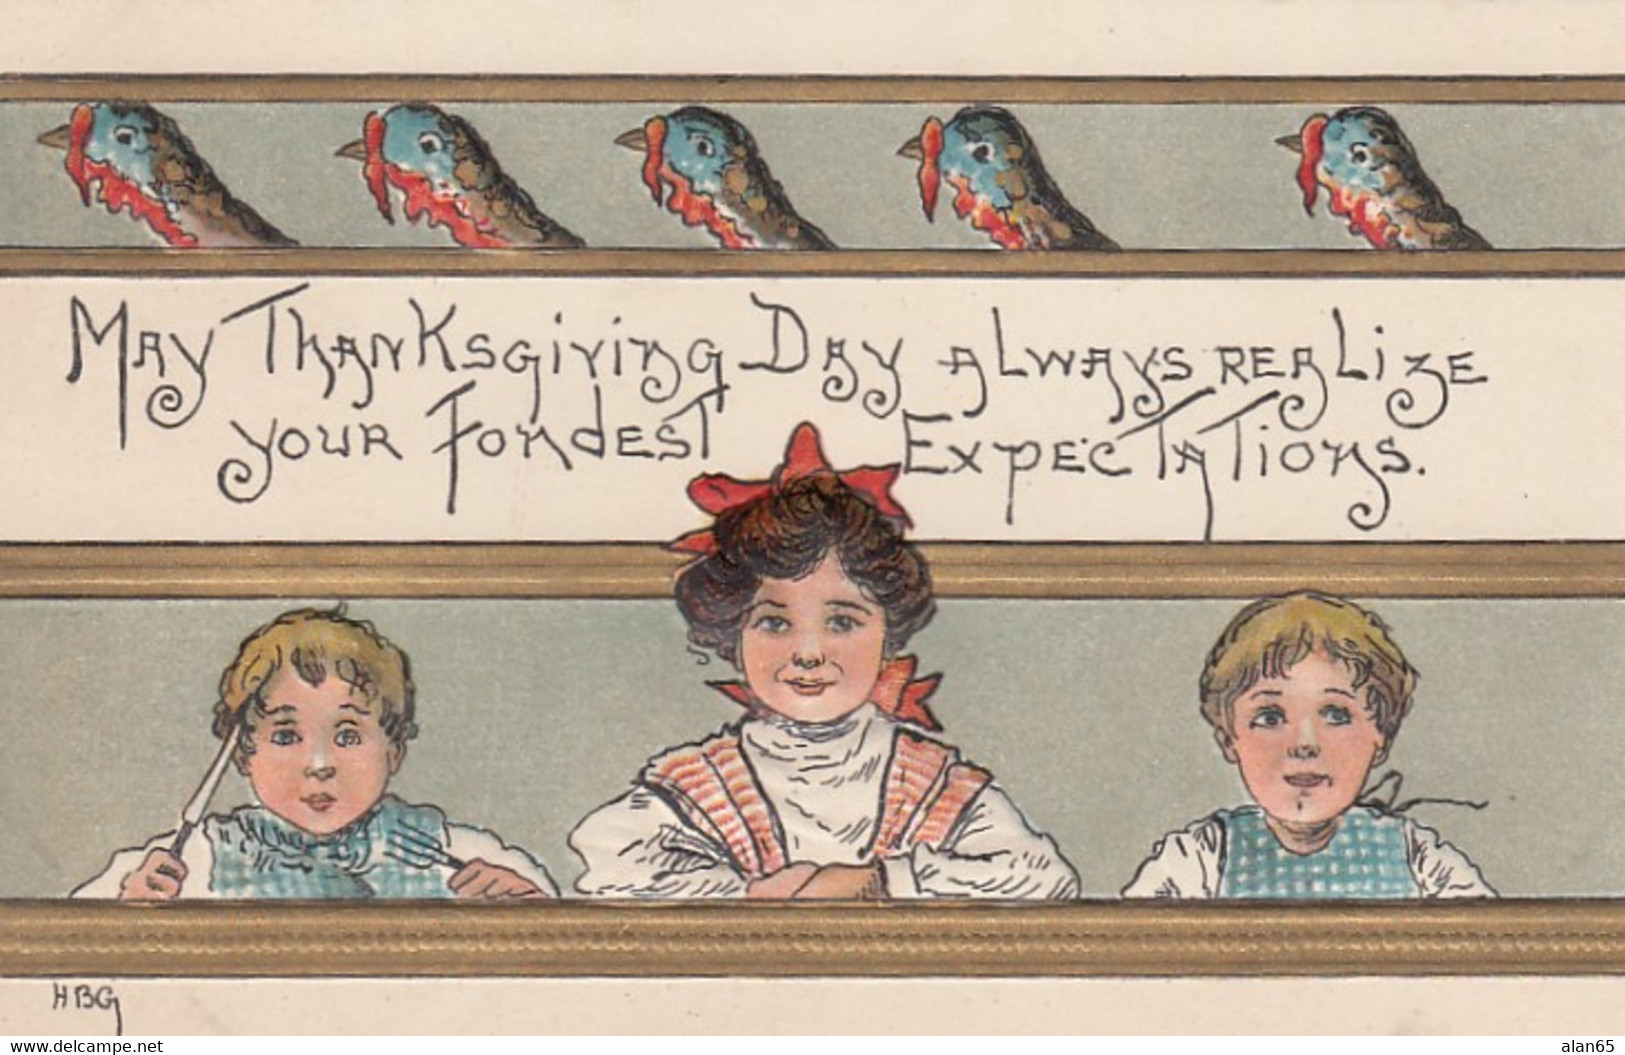 Thanksgiving Greetings, HB Griggs Artist Signed Children With Turkeys, C1900s/10s Vintage Embossed Postcard - Thanksgiving